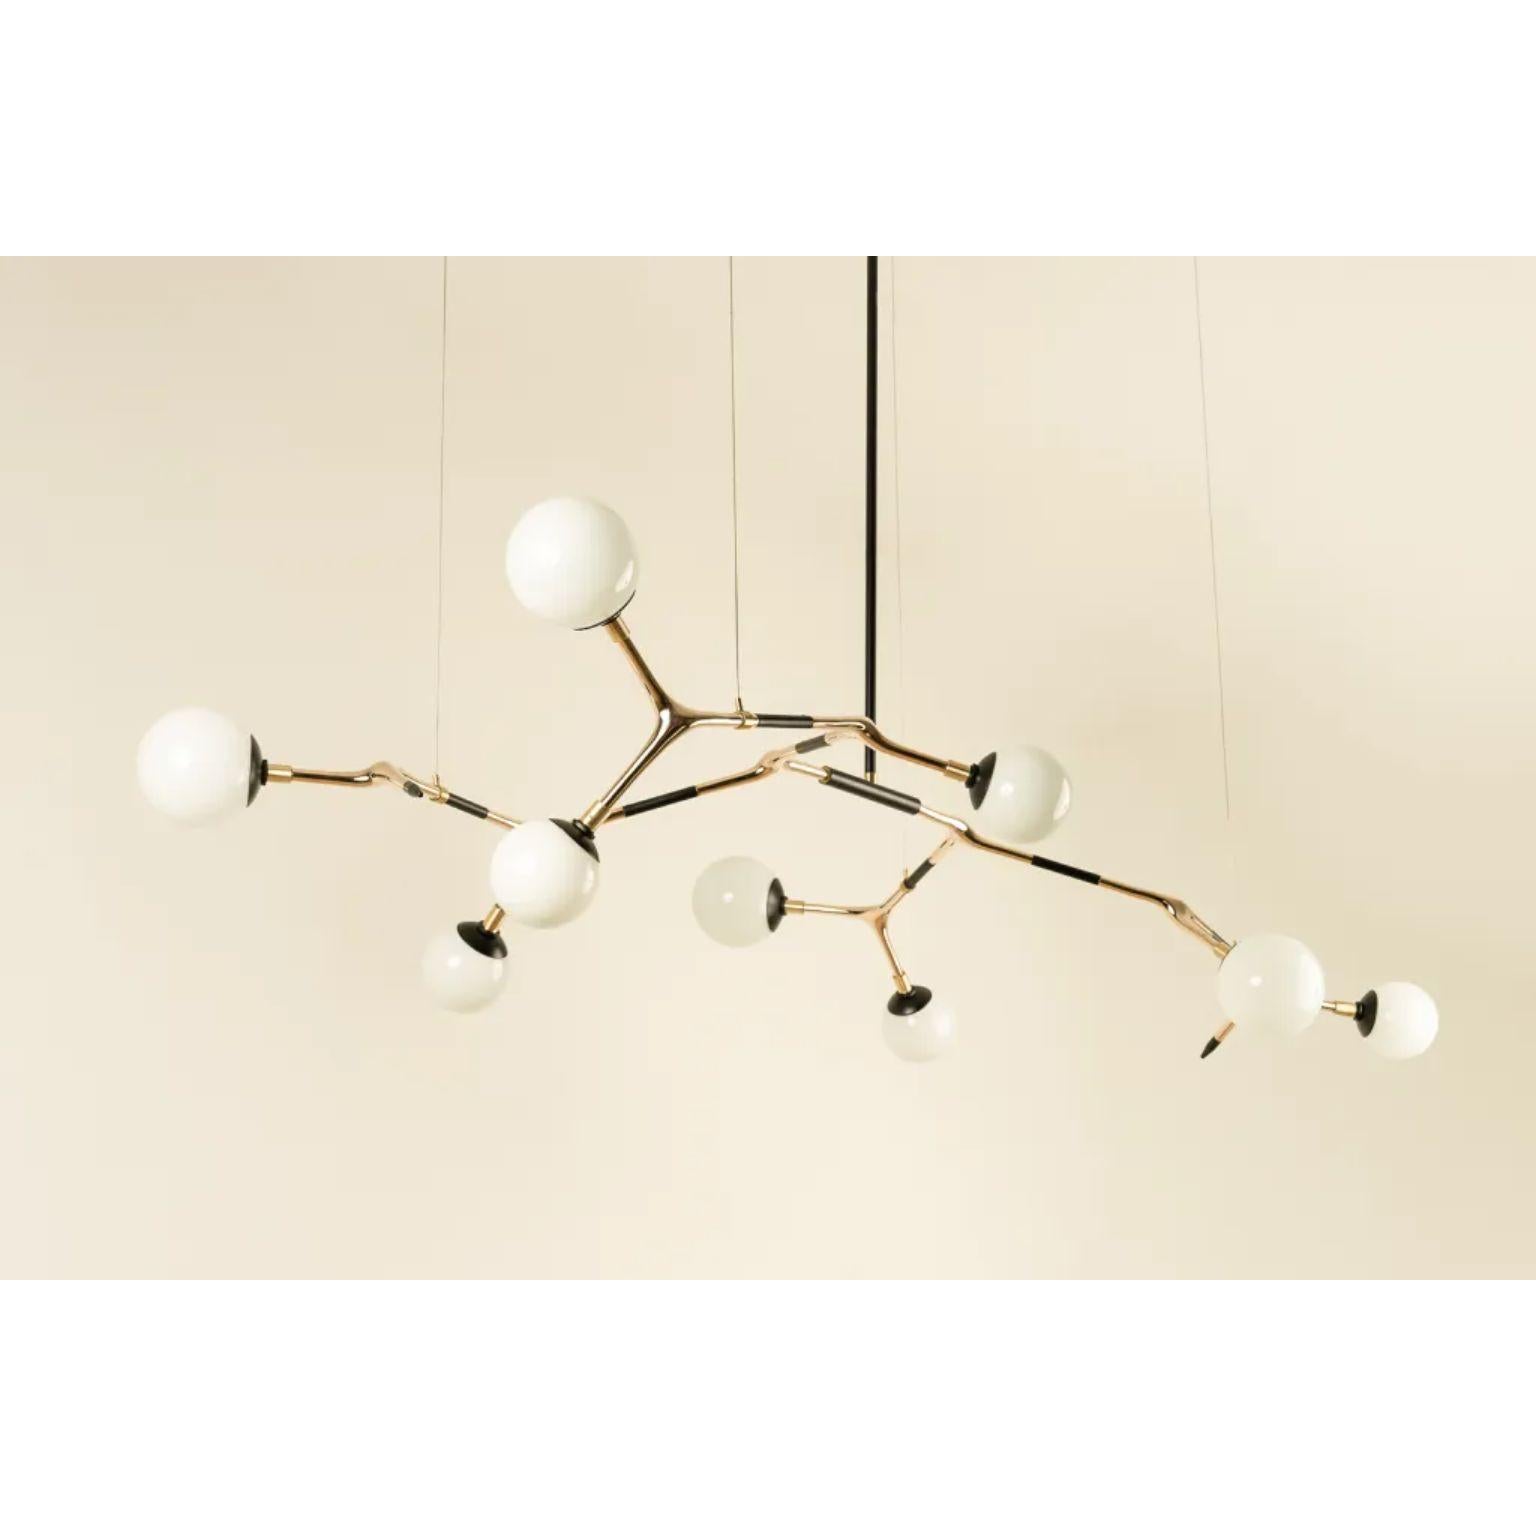 White and Polished Bronze Mantis 9 Pendant Lamp by Isabel Moncada
Dimensions: D 100 x W 190 x H 110 cm.
Materials: Cast bronze, blown glass and turned brass.

Mantis 9, discreet and elegant with measured dimensions. For a medium and sober table, the